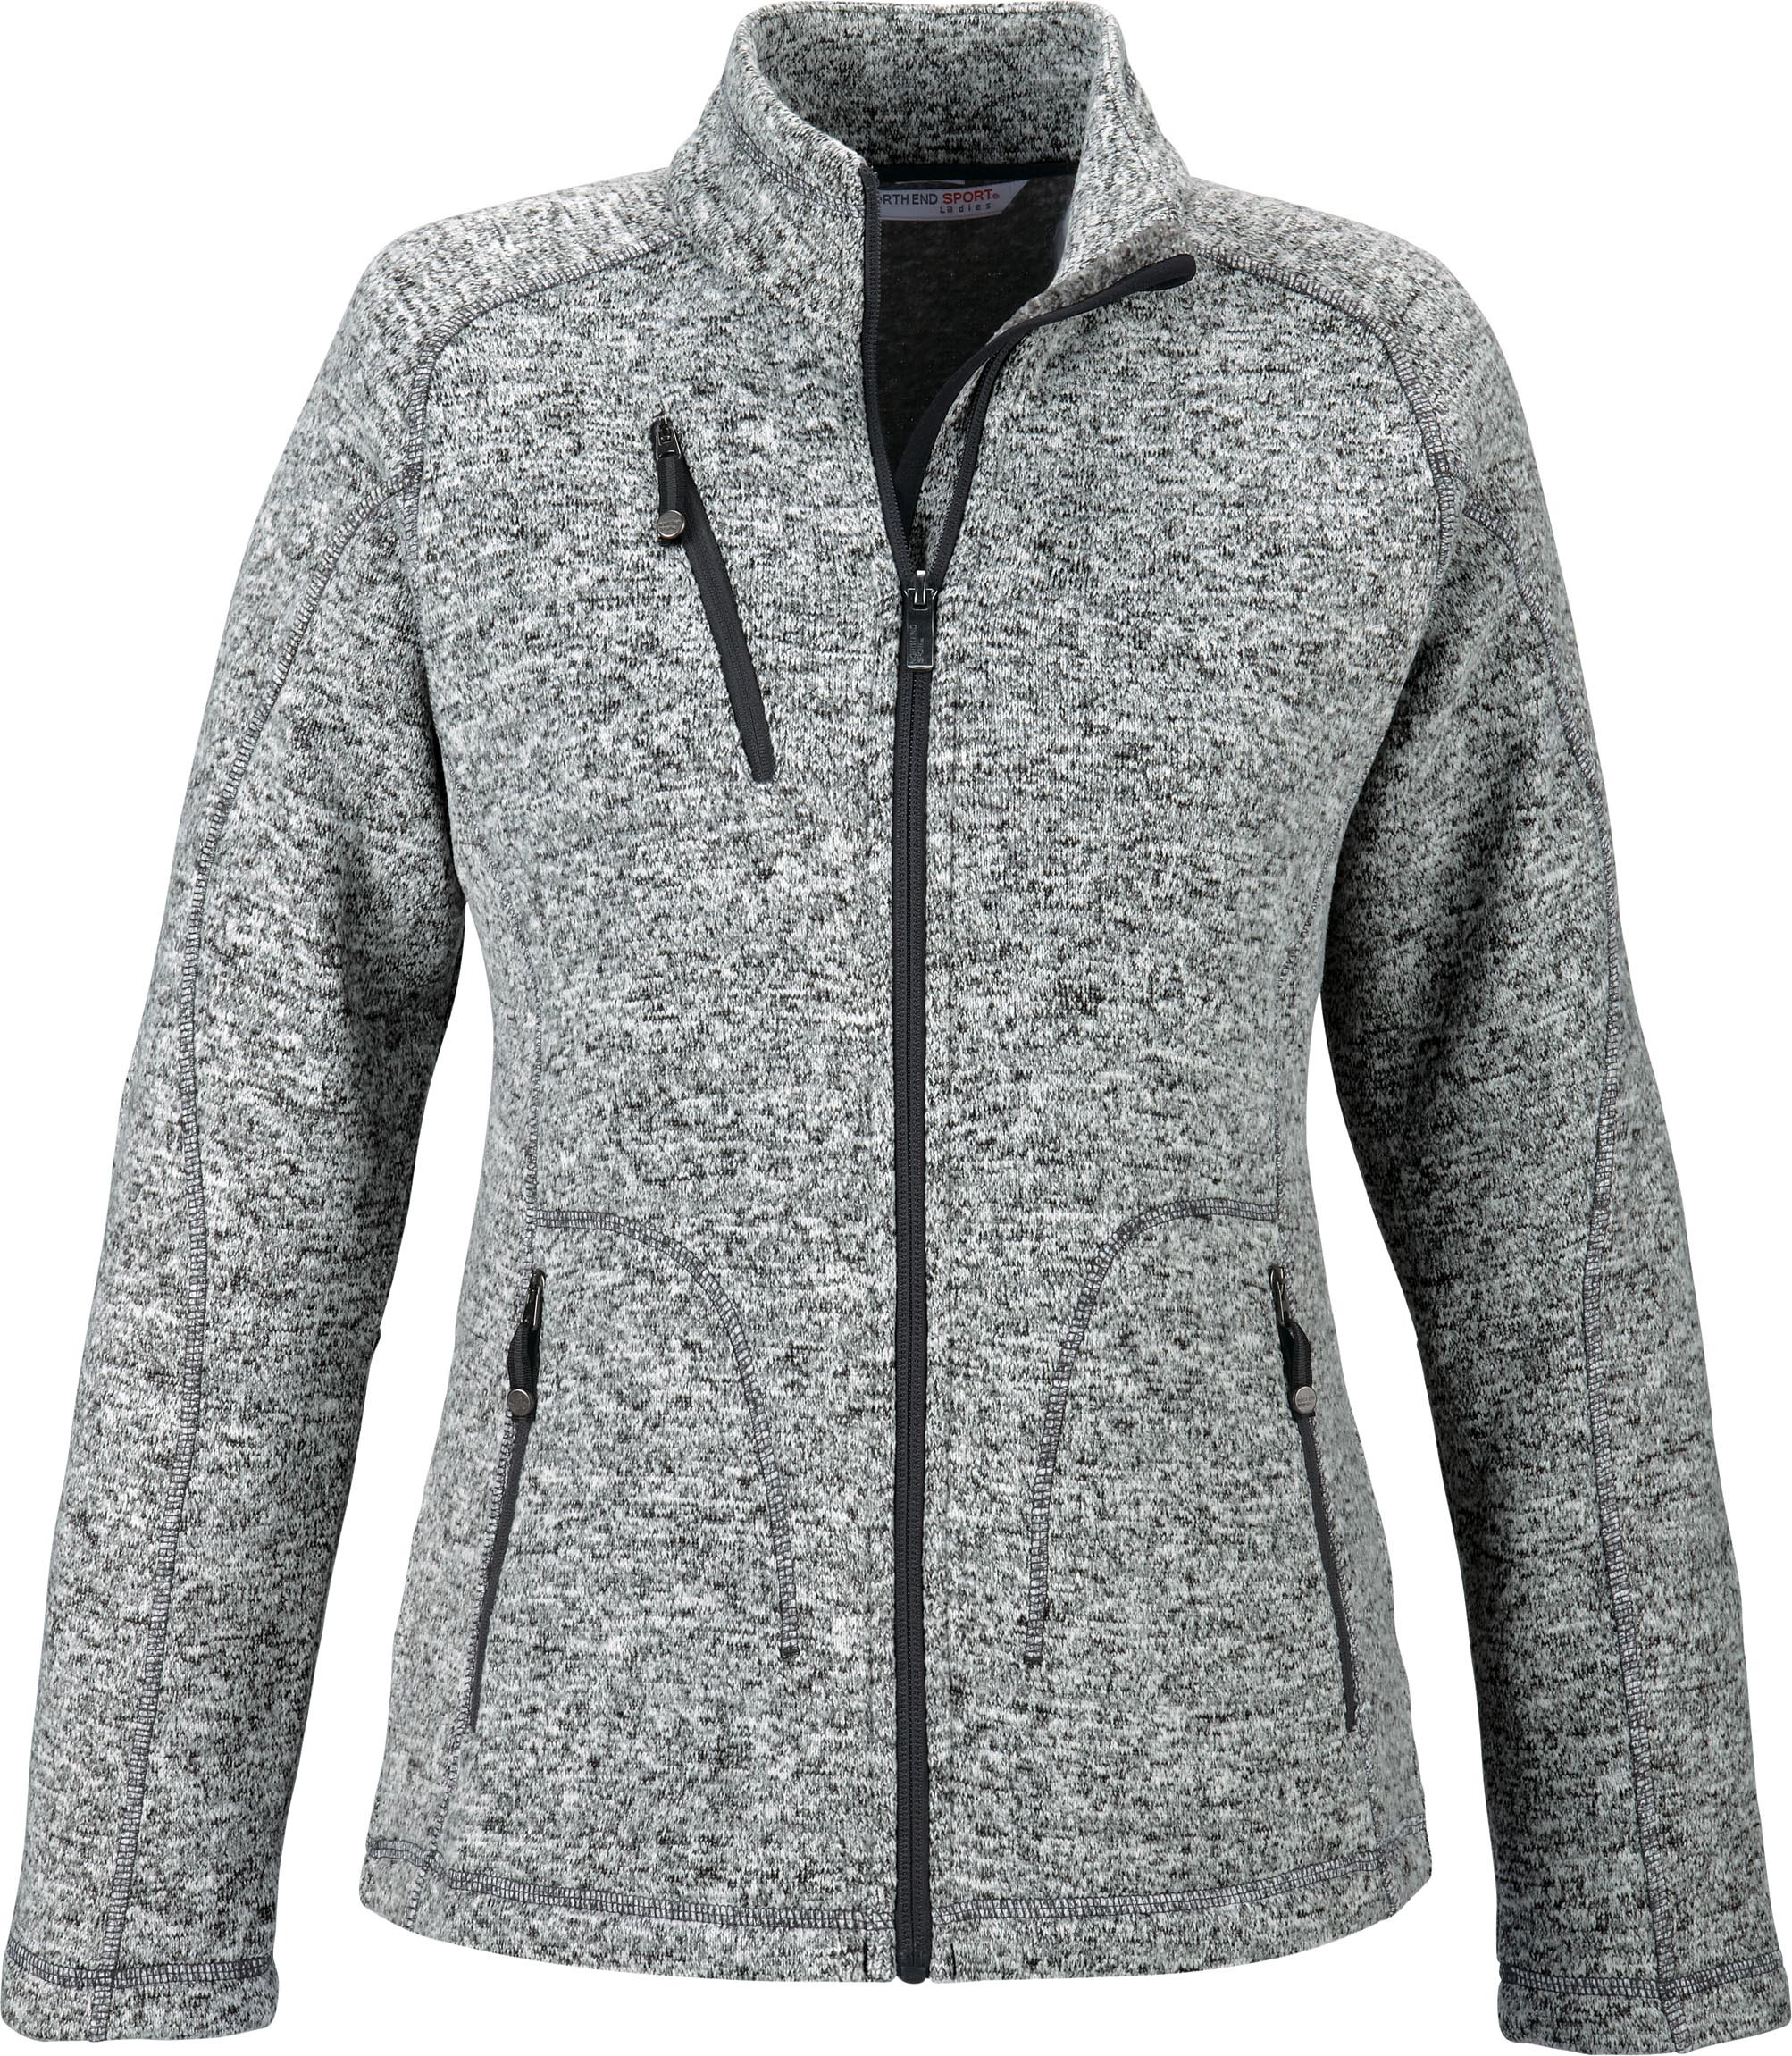 Timberland Poly Fleece Jacket 13tl001 - from $19.38